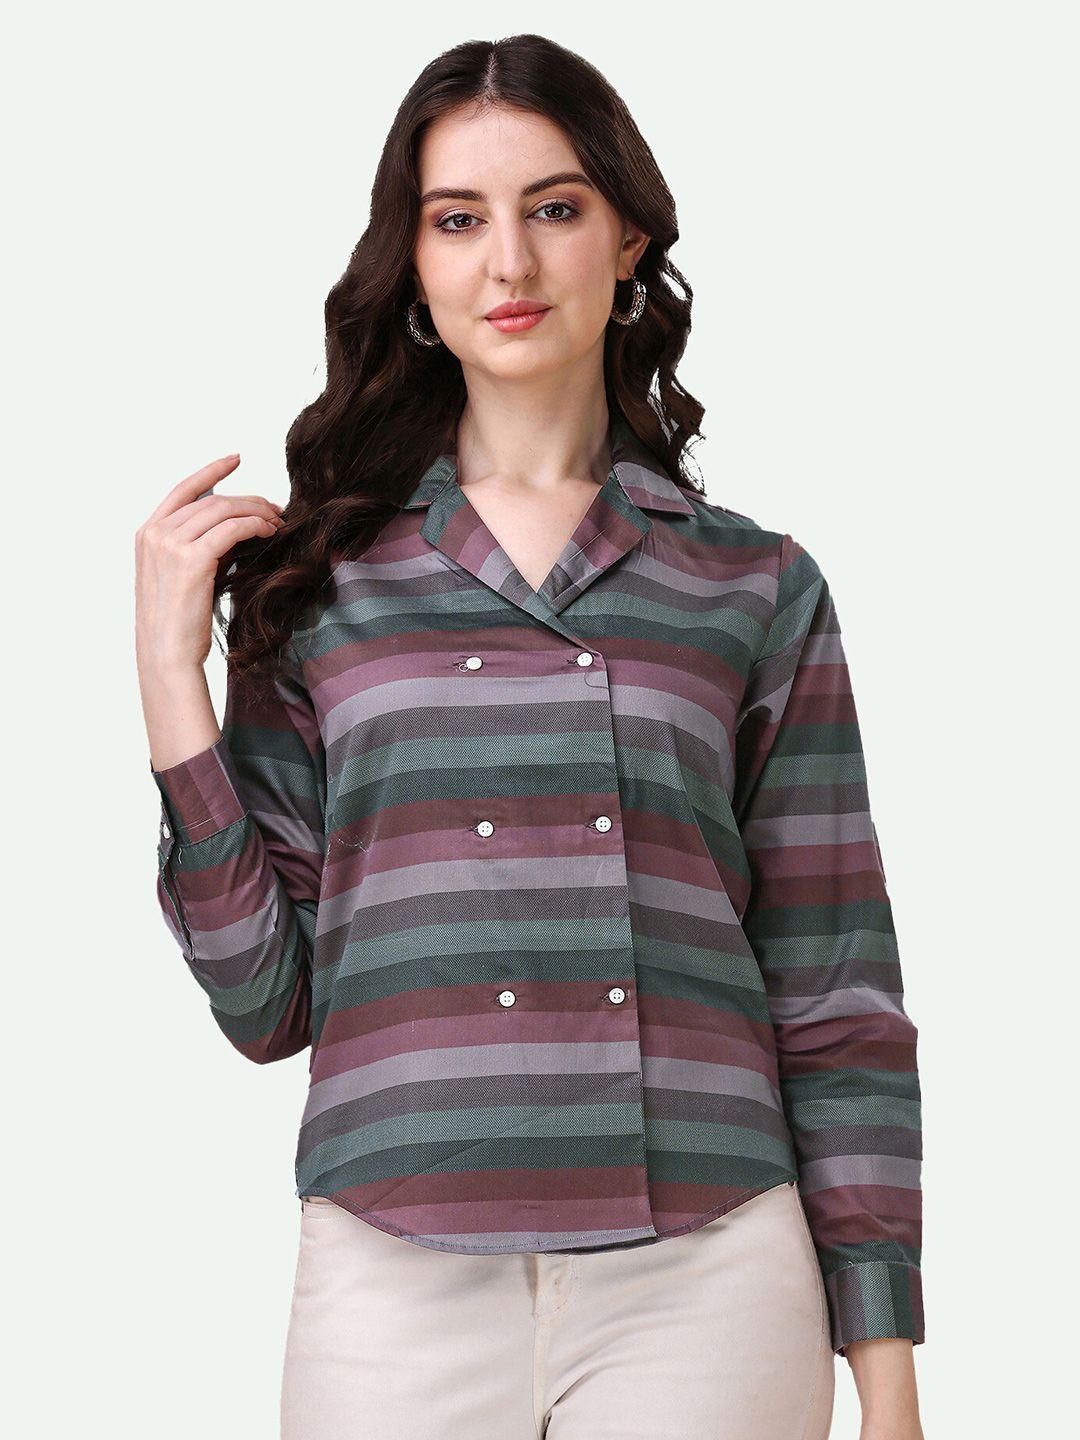 french crown standard horizontal striped opaque cotton casual shirt